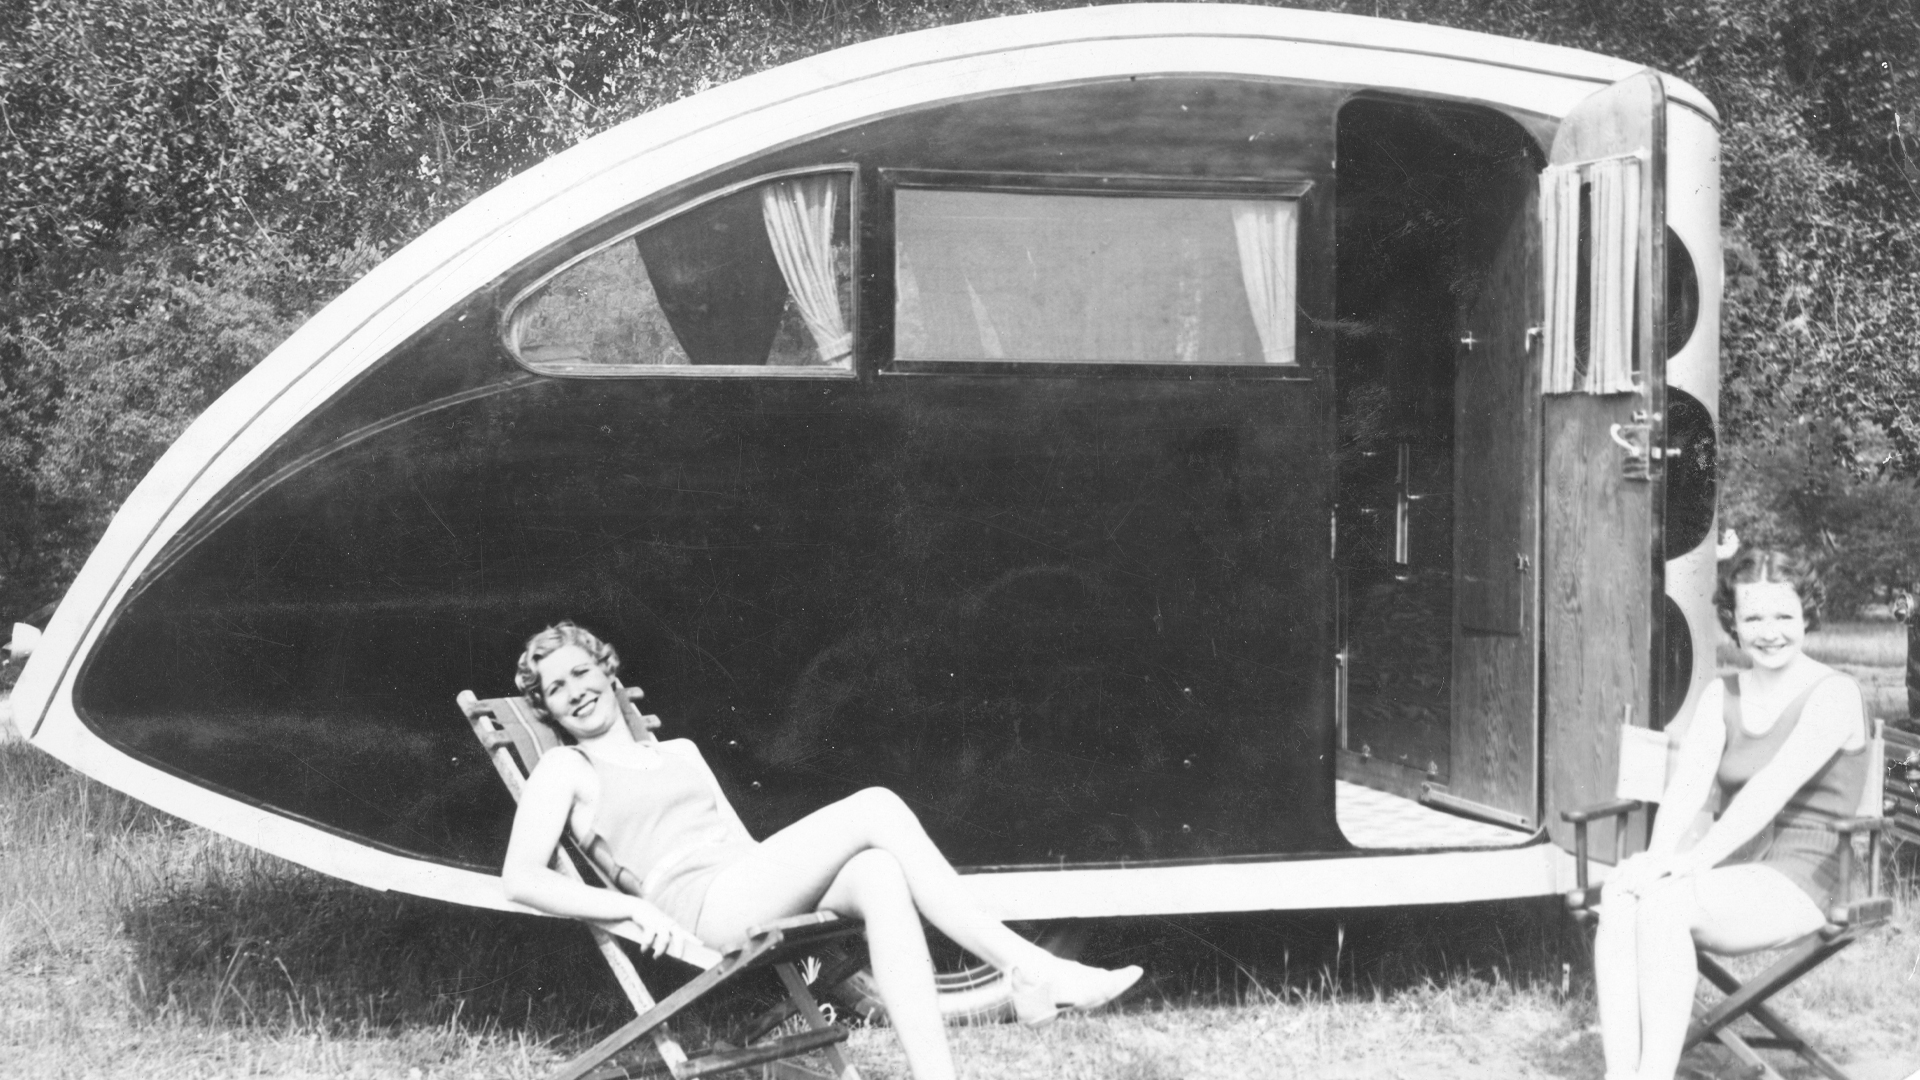 Two women sitting in lawn chairs next to an Airstream Torpedo travel trailer